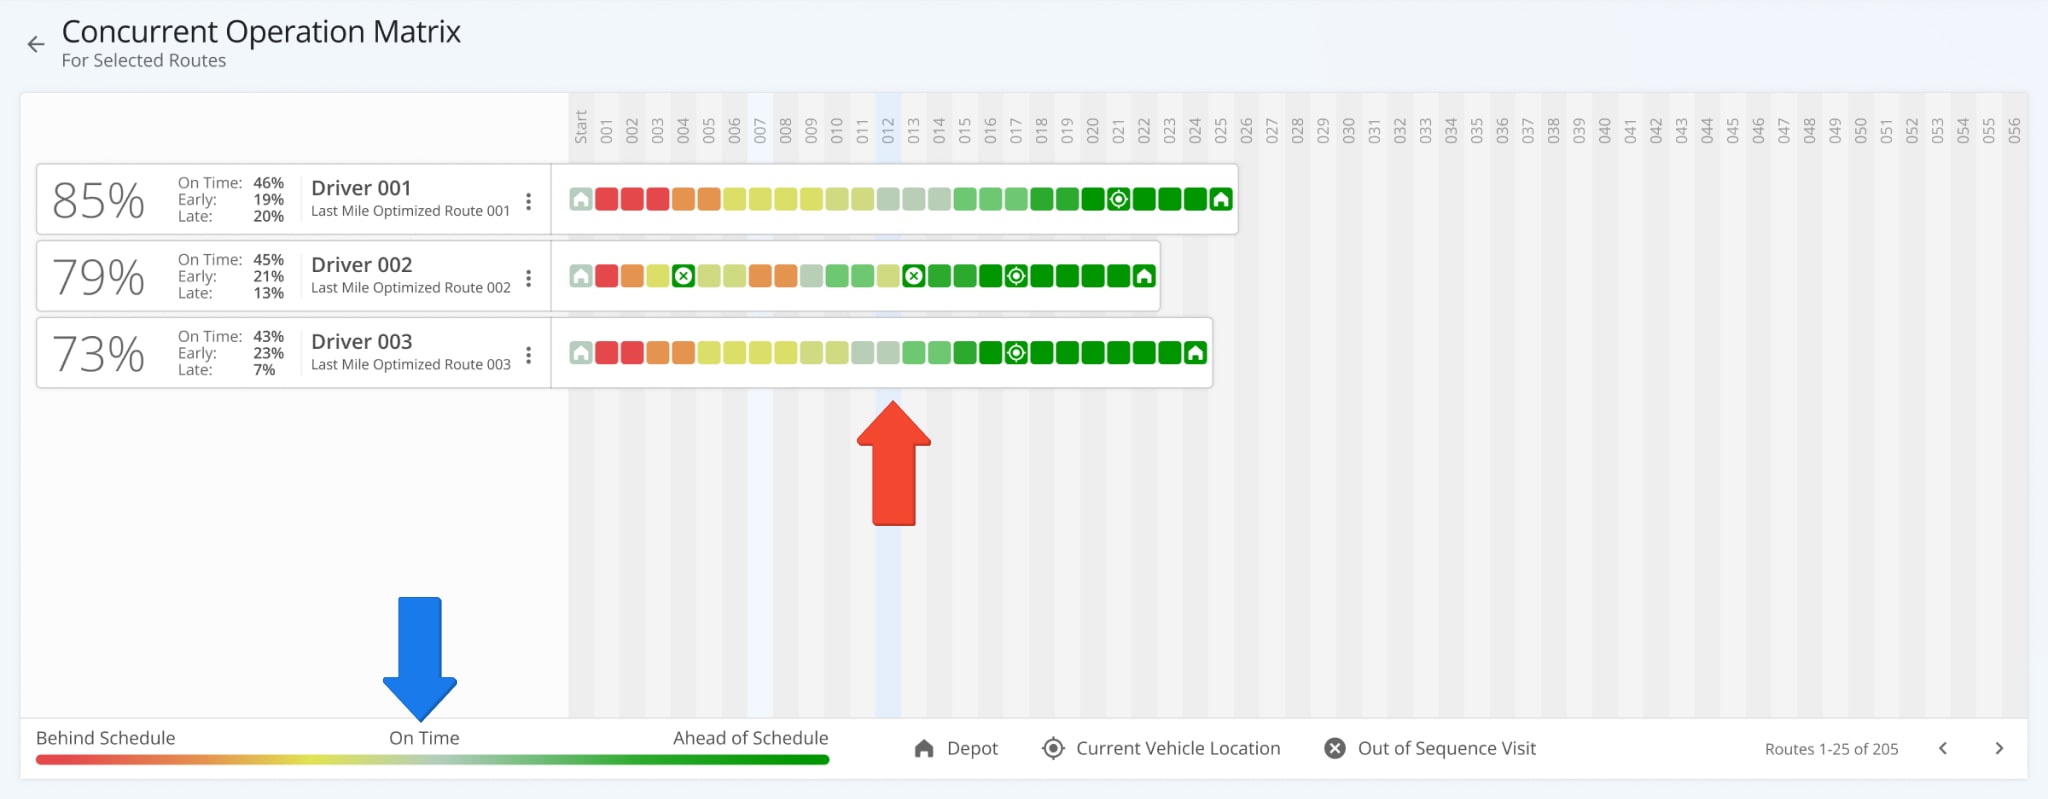 Additionally, destinations in the Operation Matrix are color-coded. Each color corresponds to a respective stop status and when it was set compared to the expected route schedule.